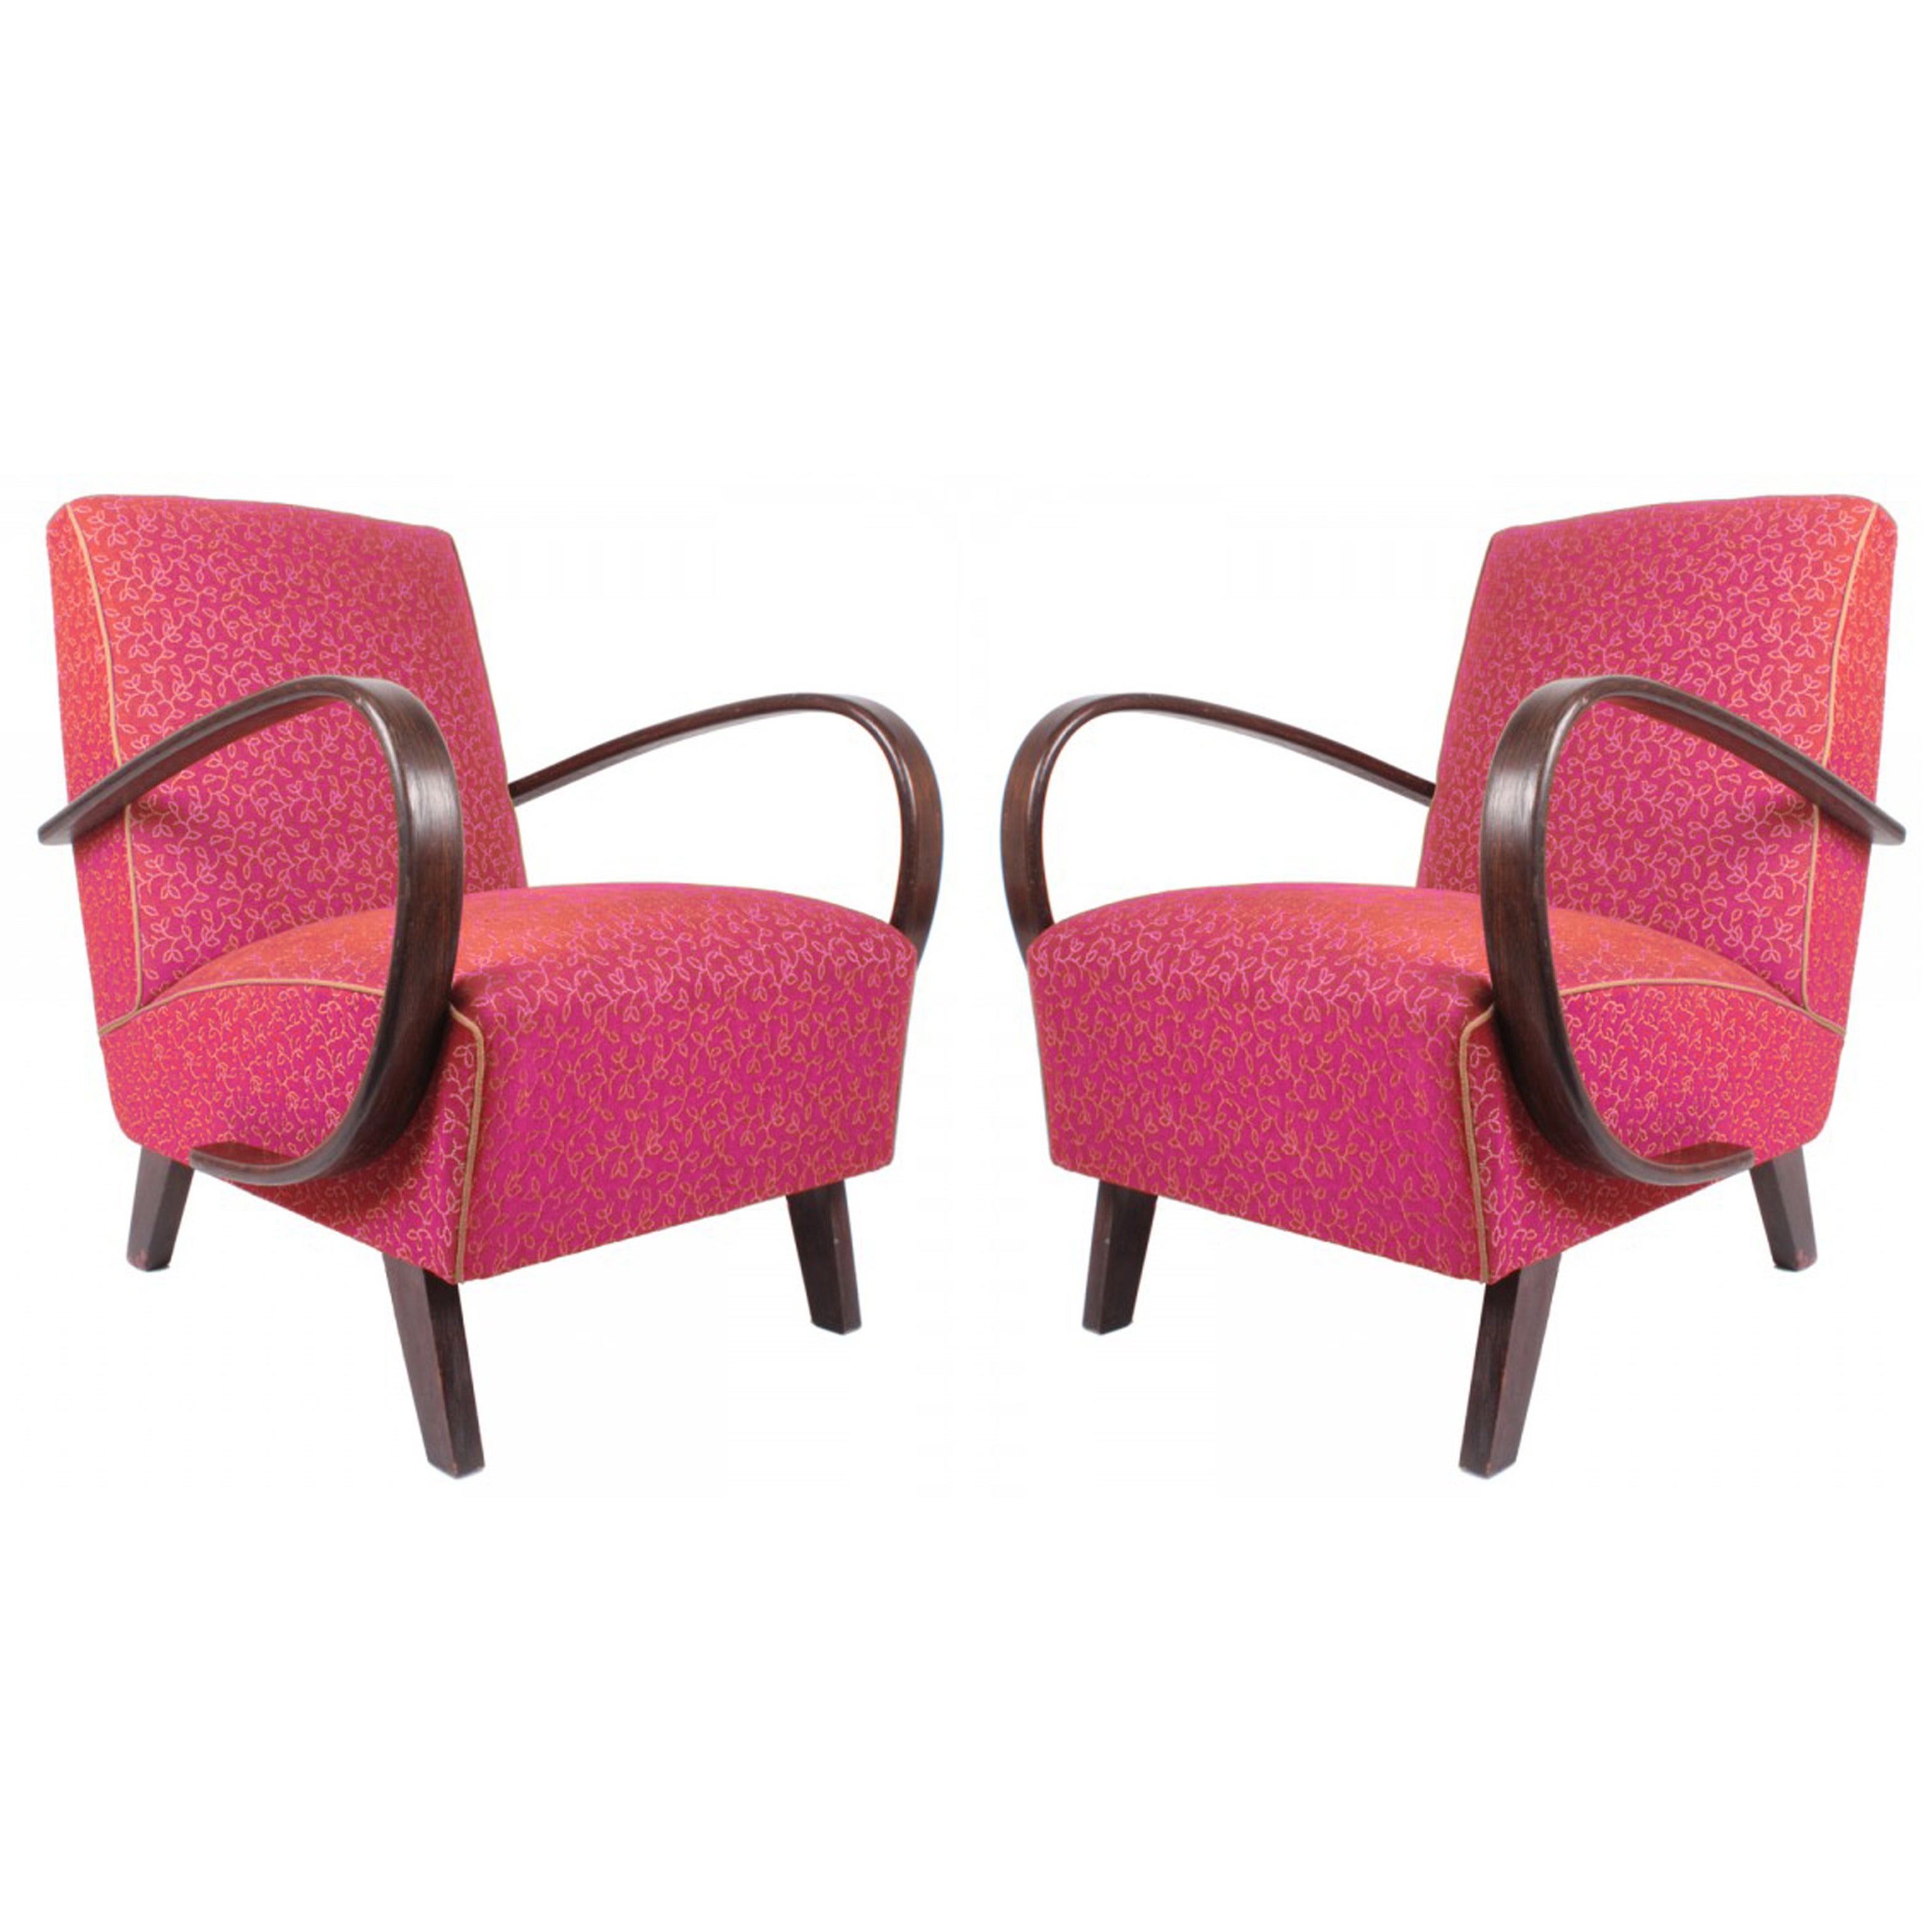 Pair of Art Deco Armchairs, circa 1930 by Jindrich Halabala For Sale